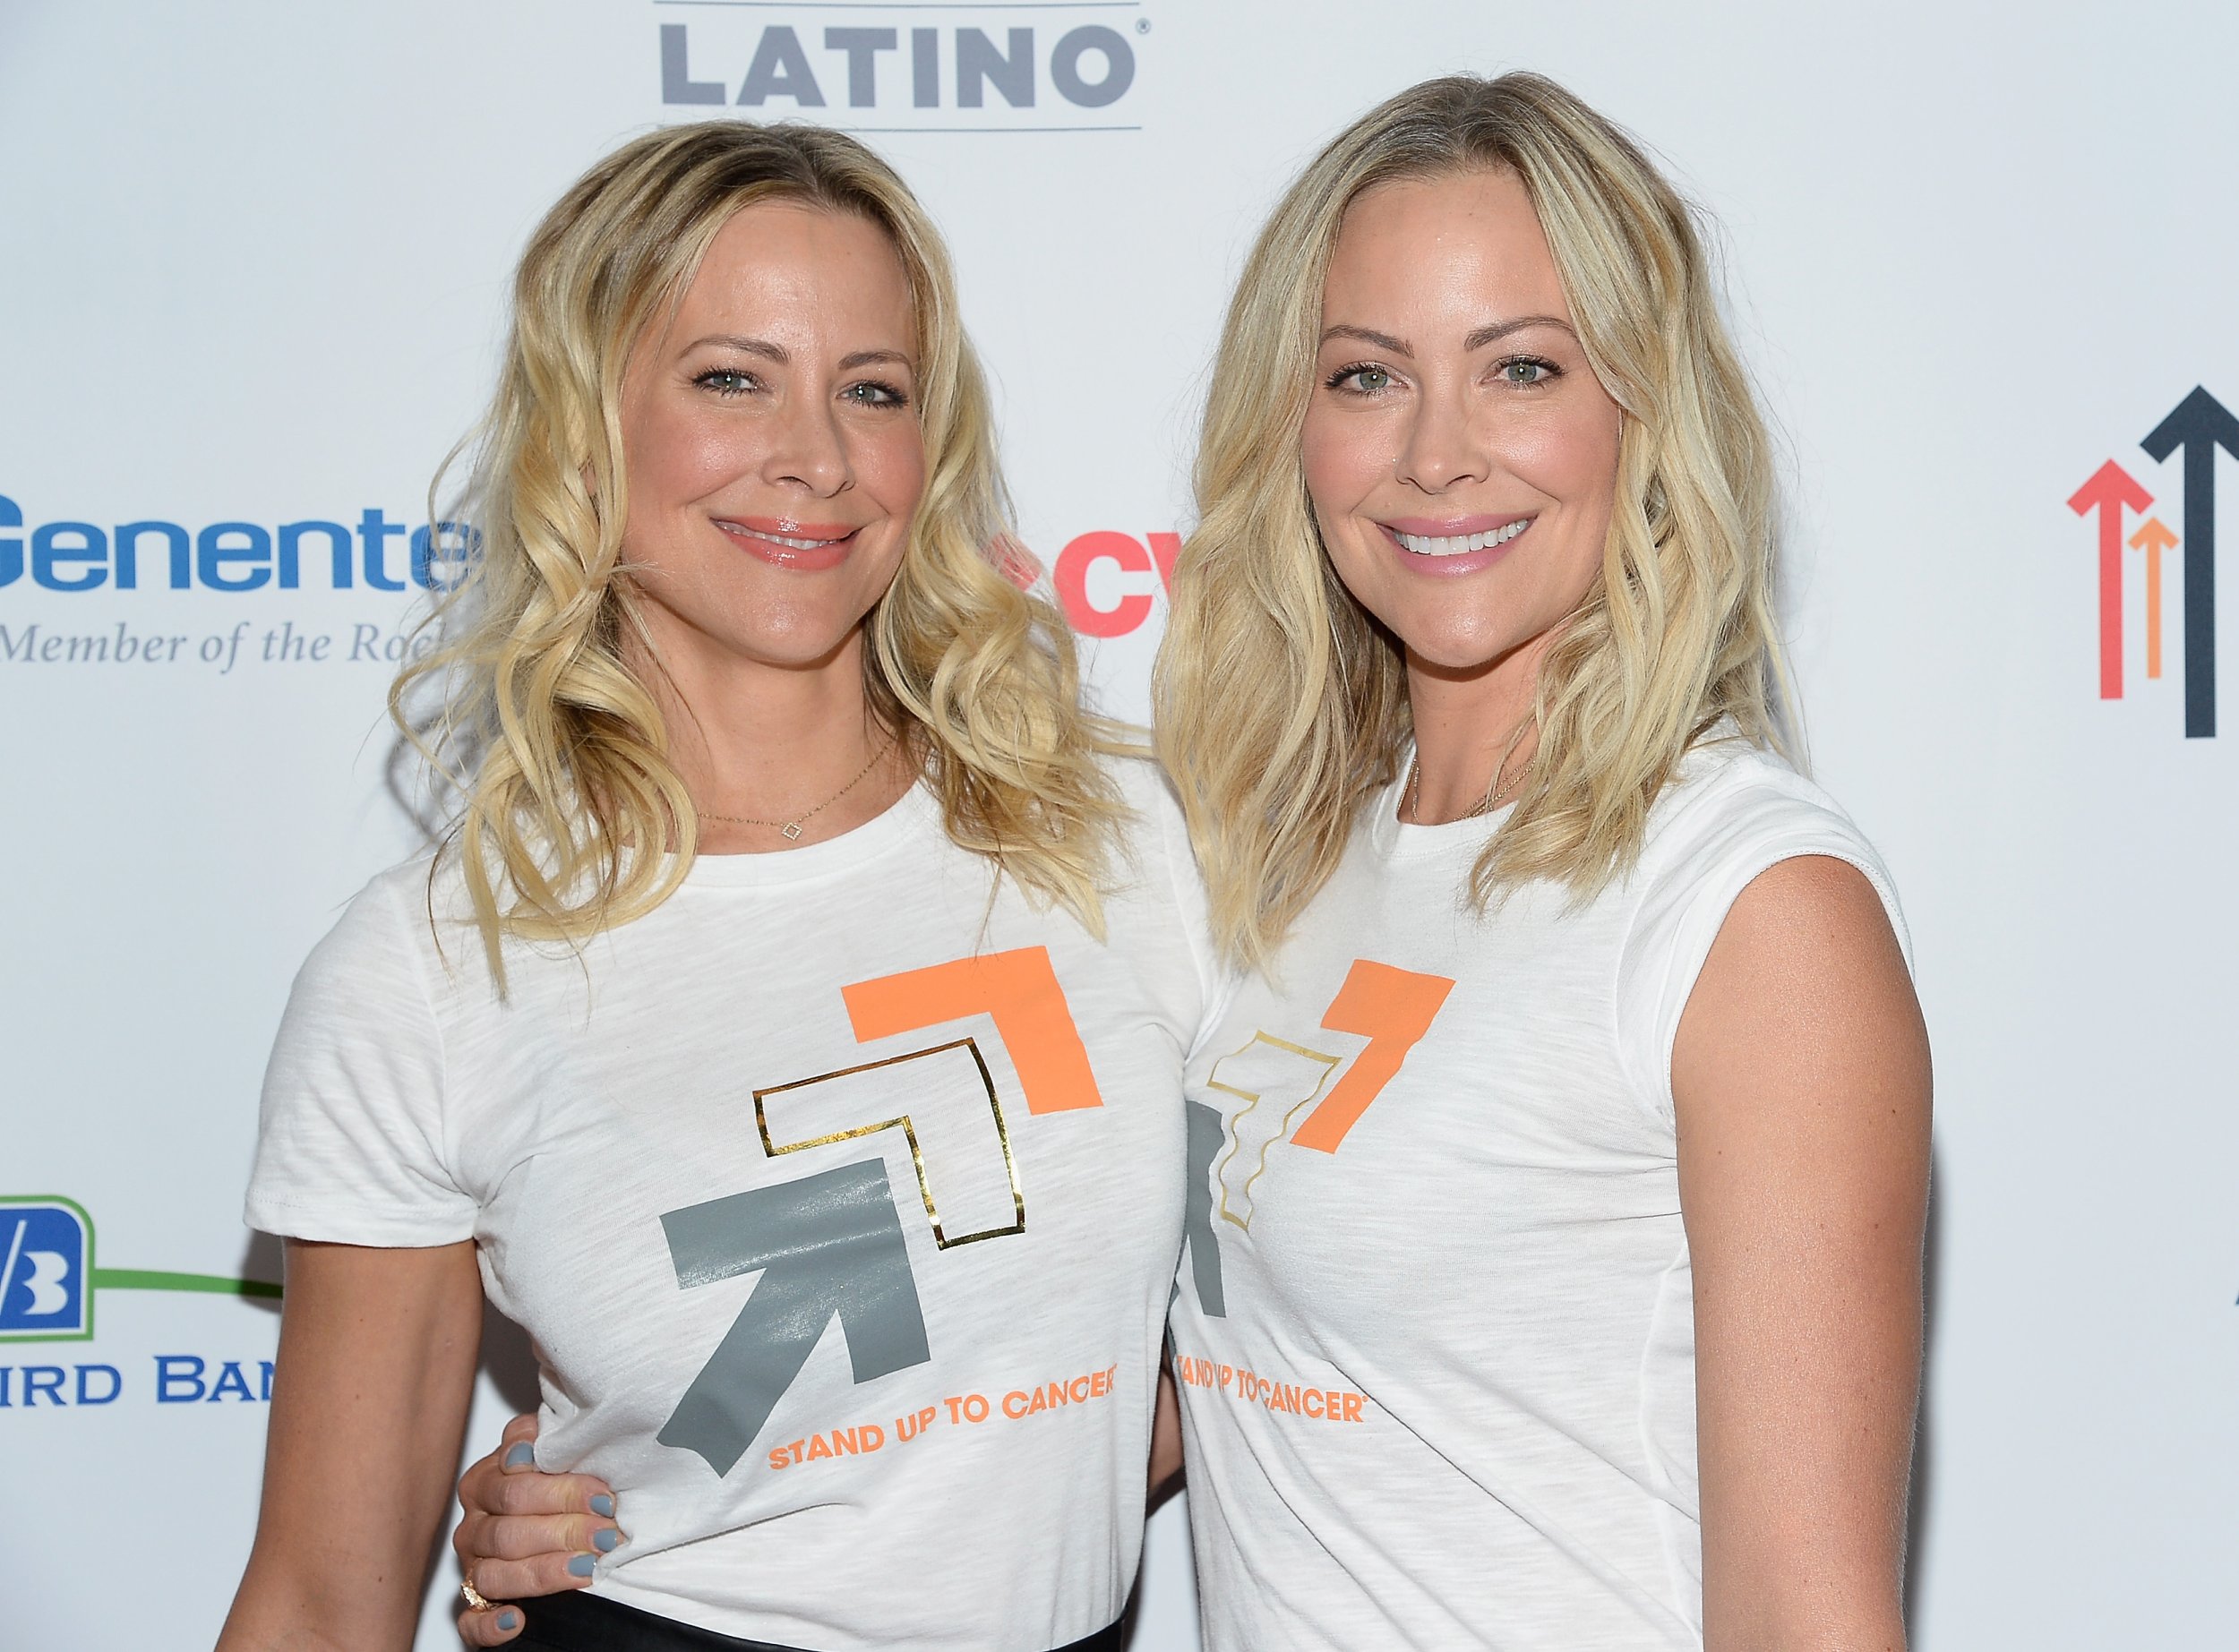 Brittany and Cynthia Daniel - Getty Images